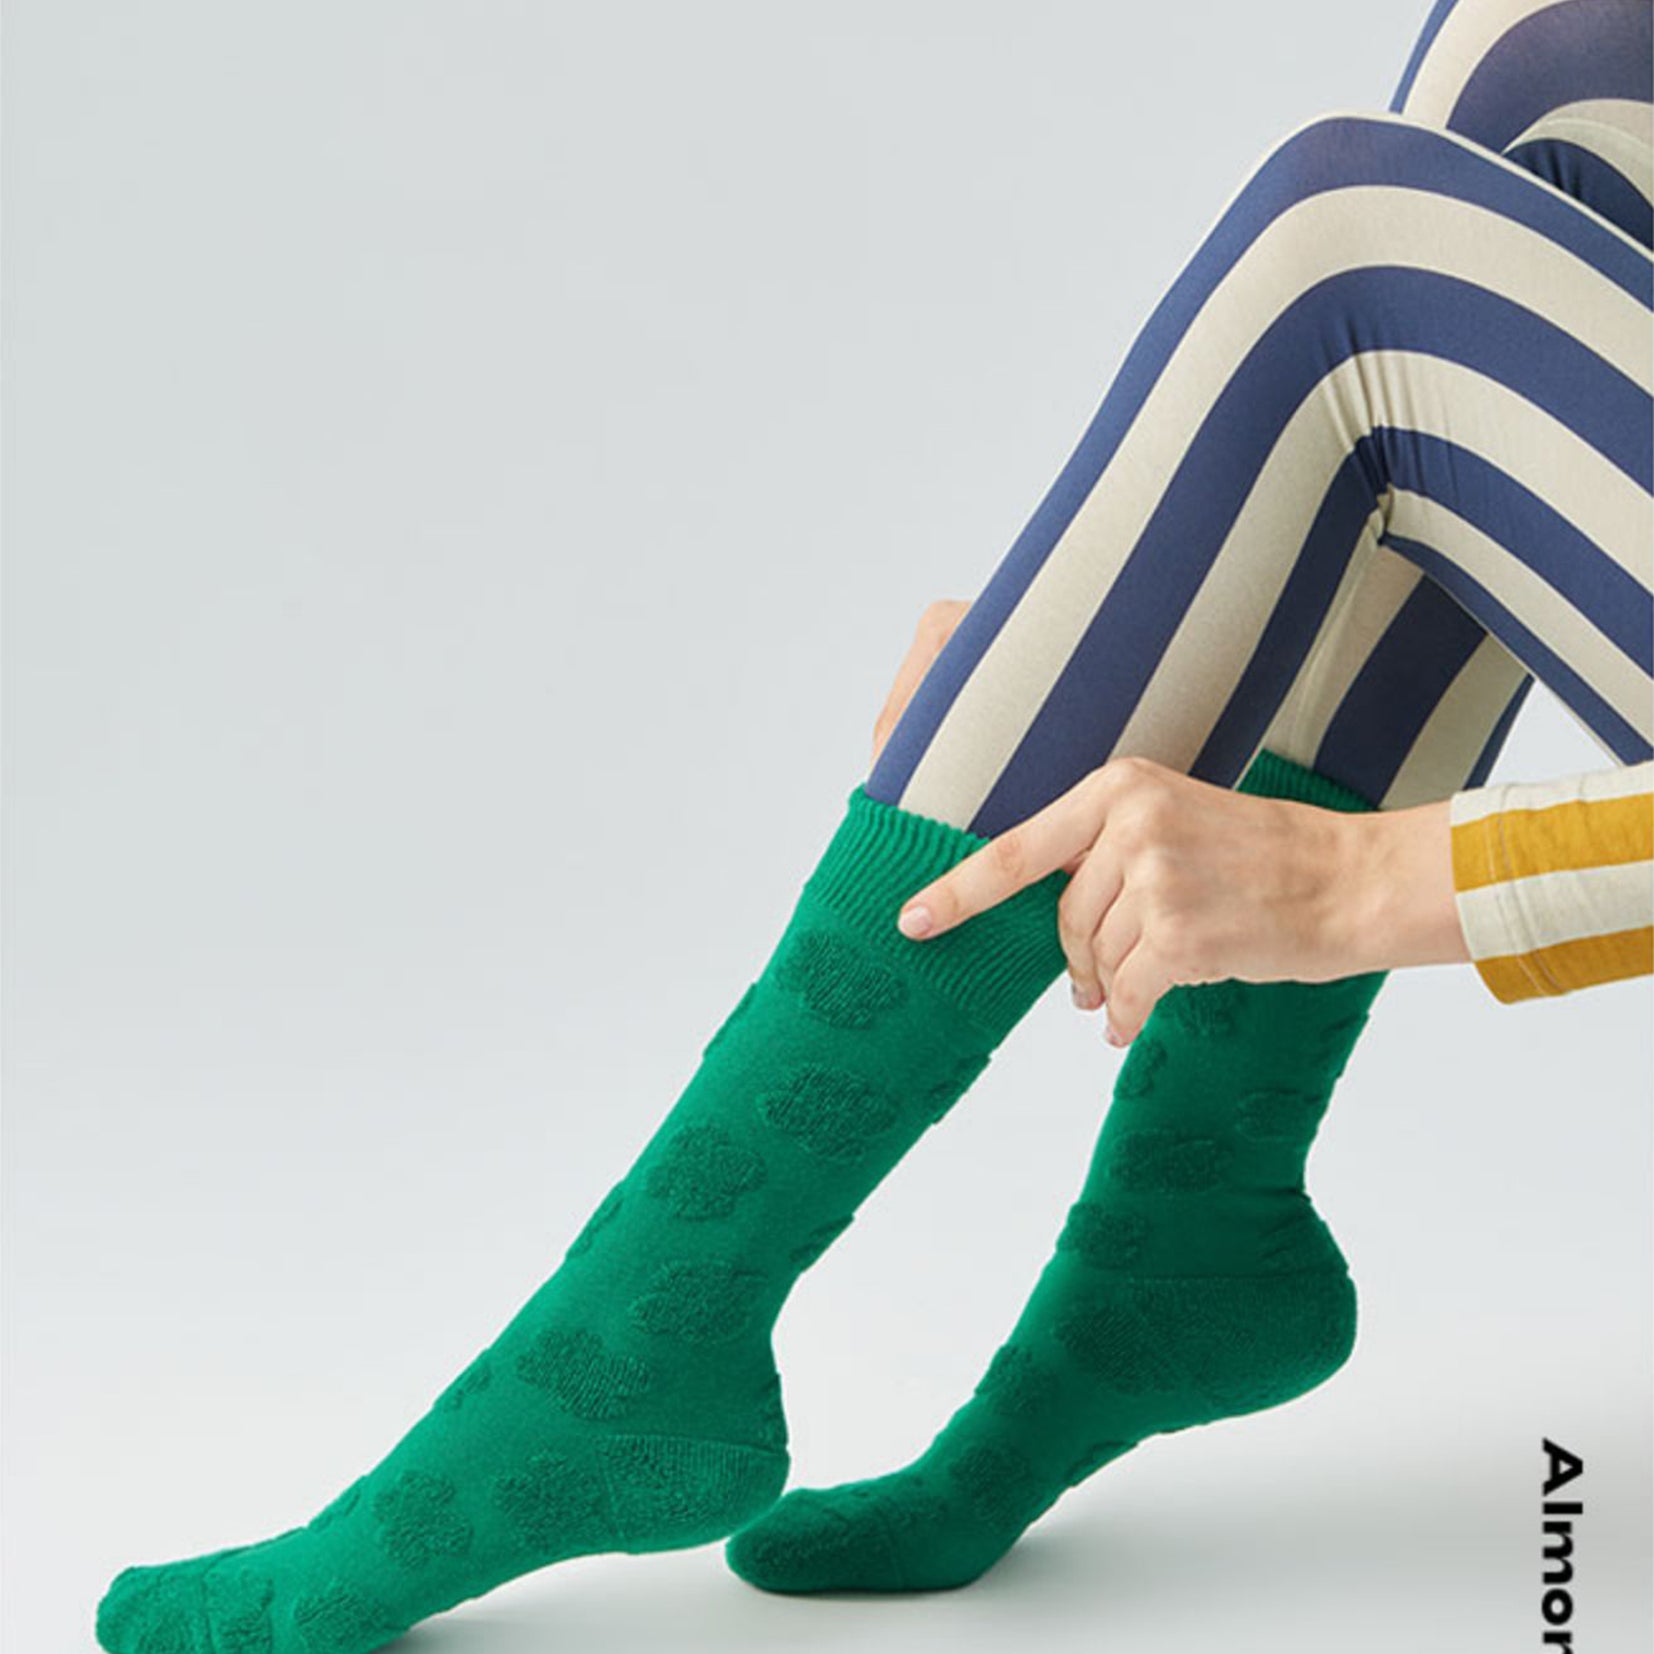 Terry jacquard mid-calf sock in forest